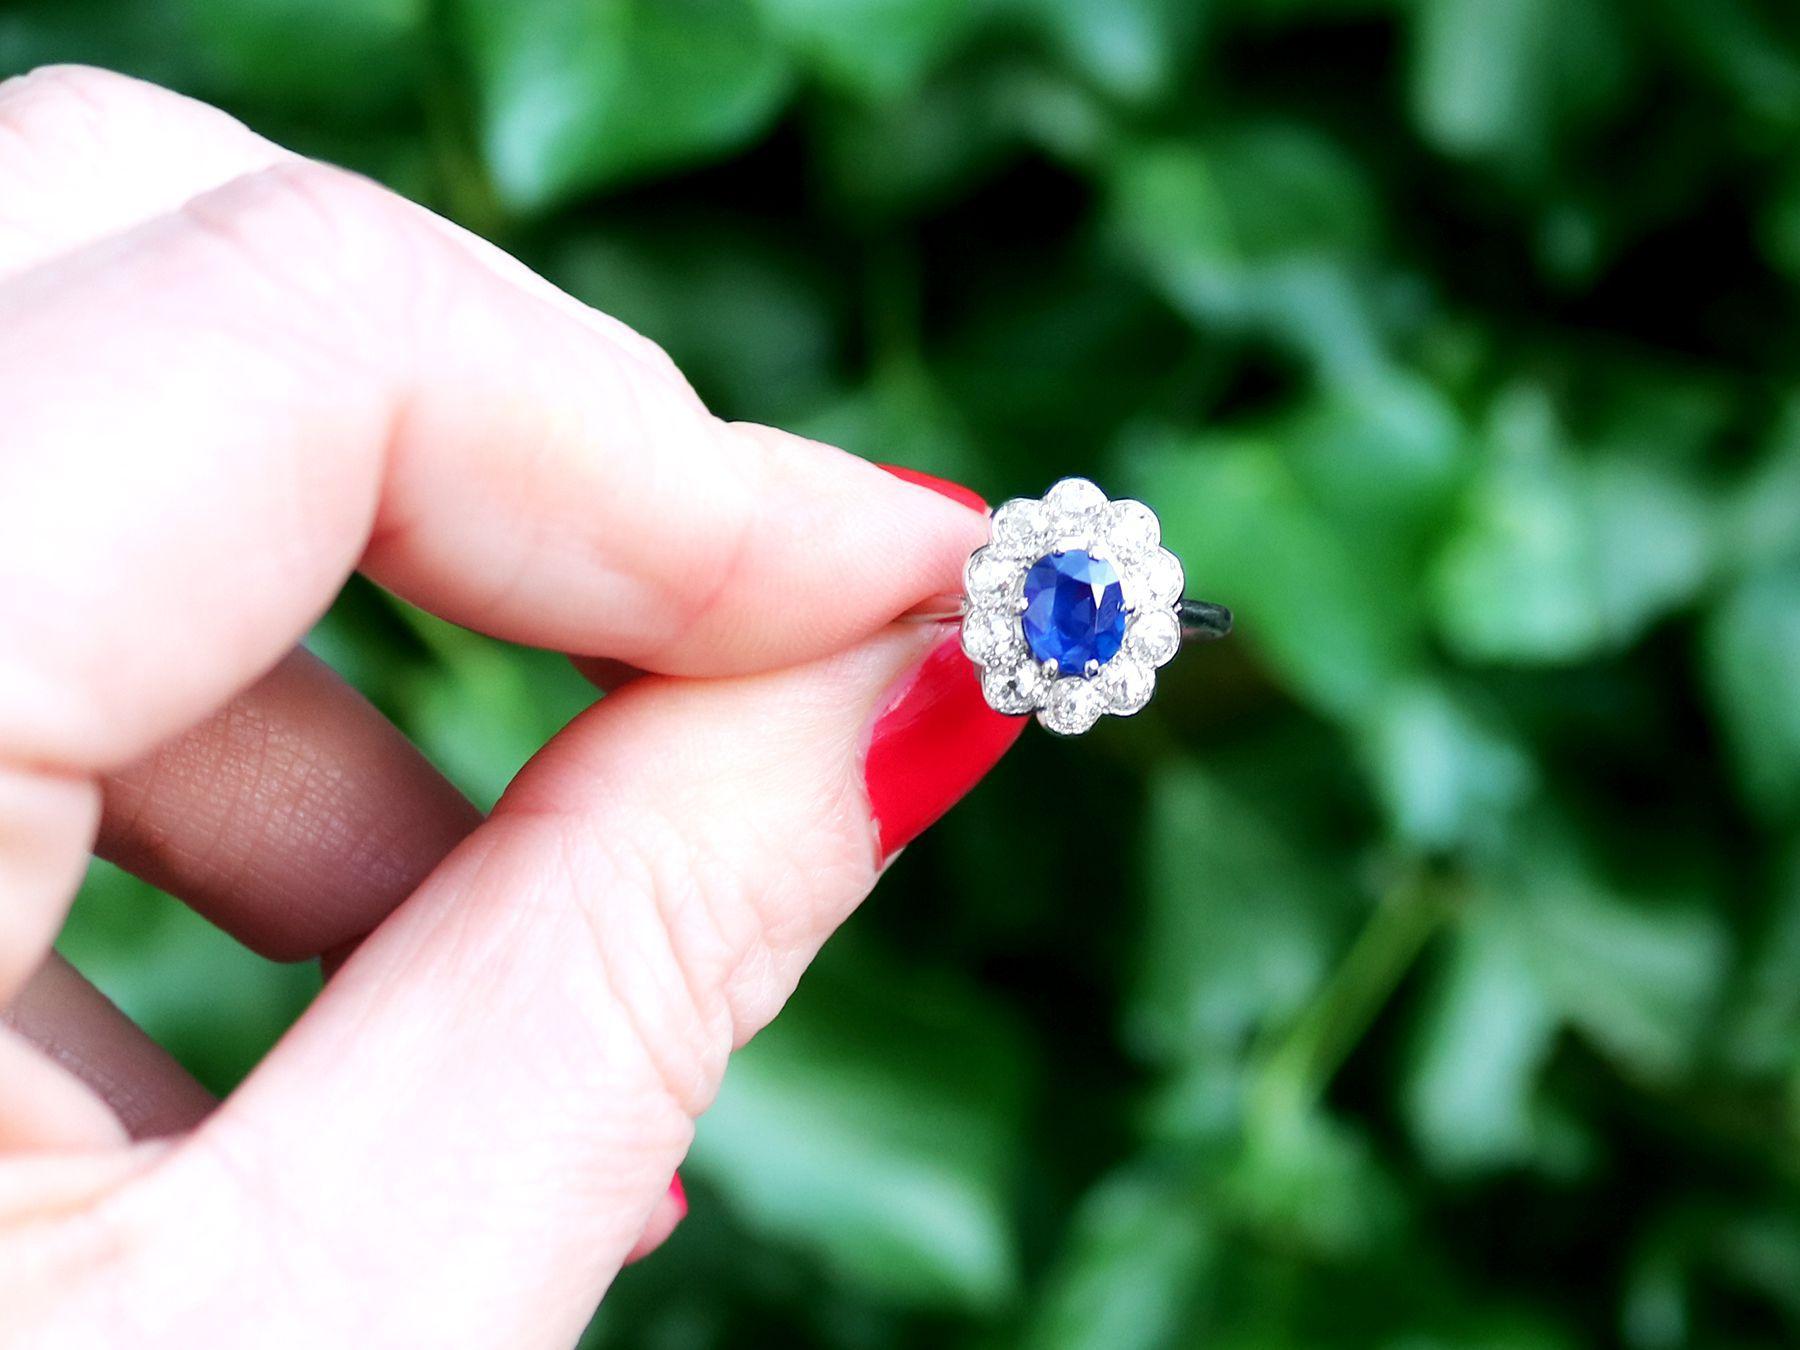 A stunning antique 1920s 0.95 carat sapphire and 1.15 carat diamond, platinum cluster style dress ring; part of our diverse antique jewelry and estate jewelry collections.

This stunning, fine and impressive sapphire ring has been crafted in